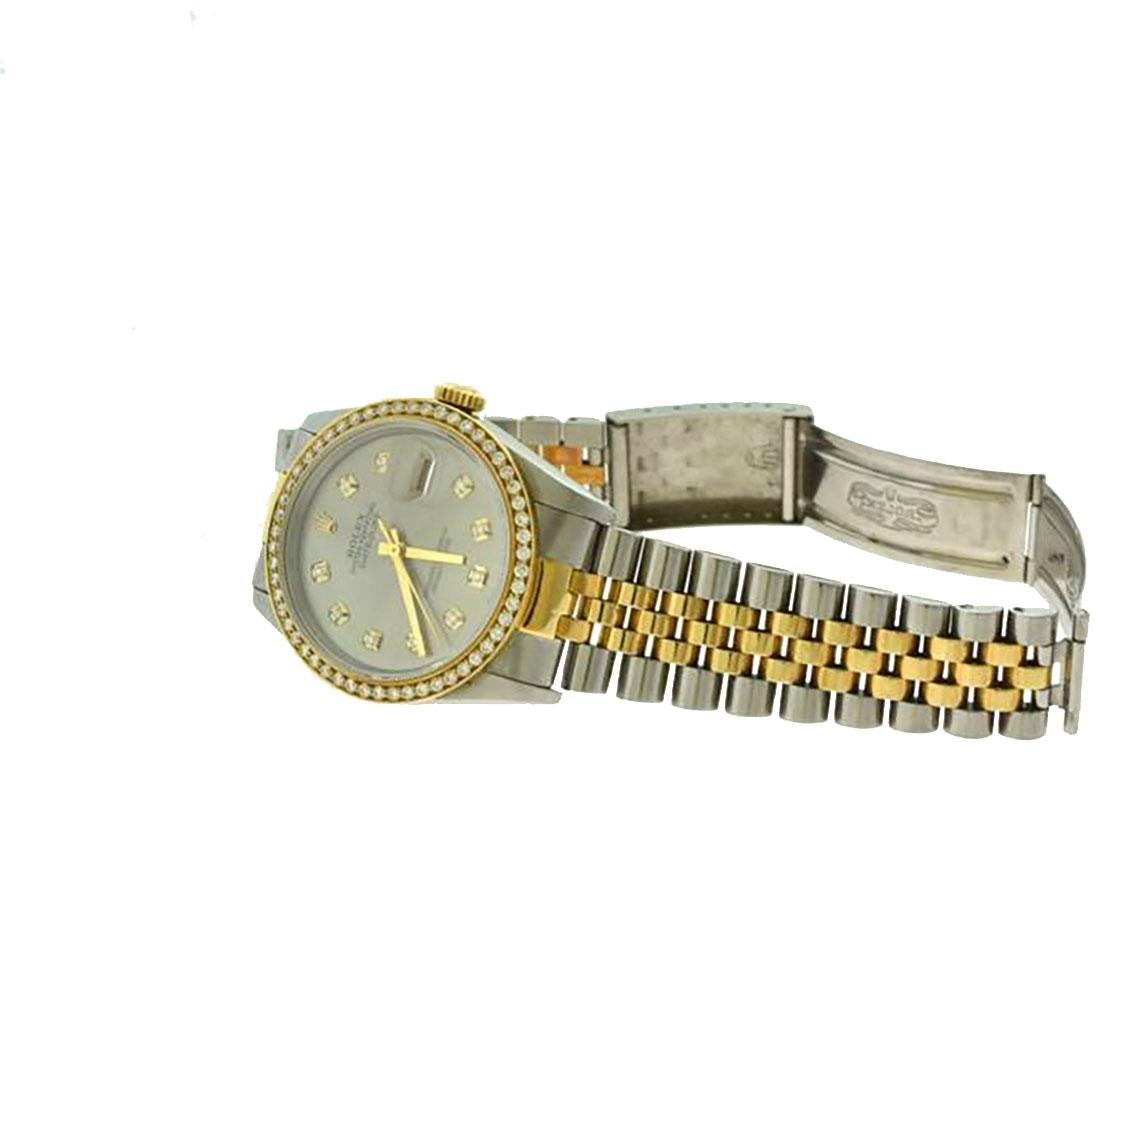 Brand: Rolex

Model Name: Datejust

Model Number: 16013

Movement: Automatic

Case Size: 36 mm

Case Material: Stainless Steel / 18k Yellow Gold

Dial: Silver Dial/Diamond Hour Markers

Bezel: Custom Diamond

Hour Markers: Diamond

Bracelet: